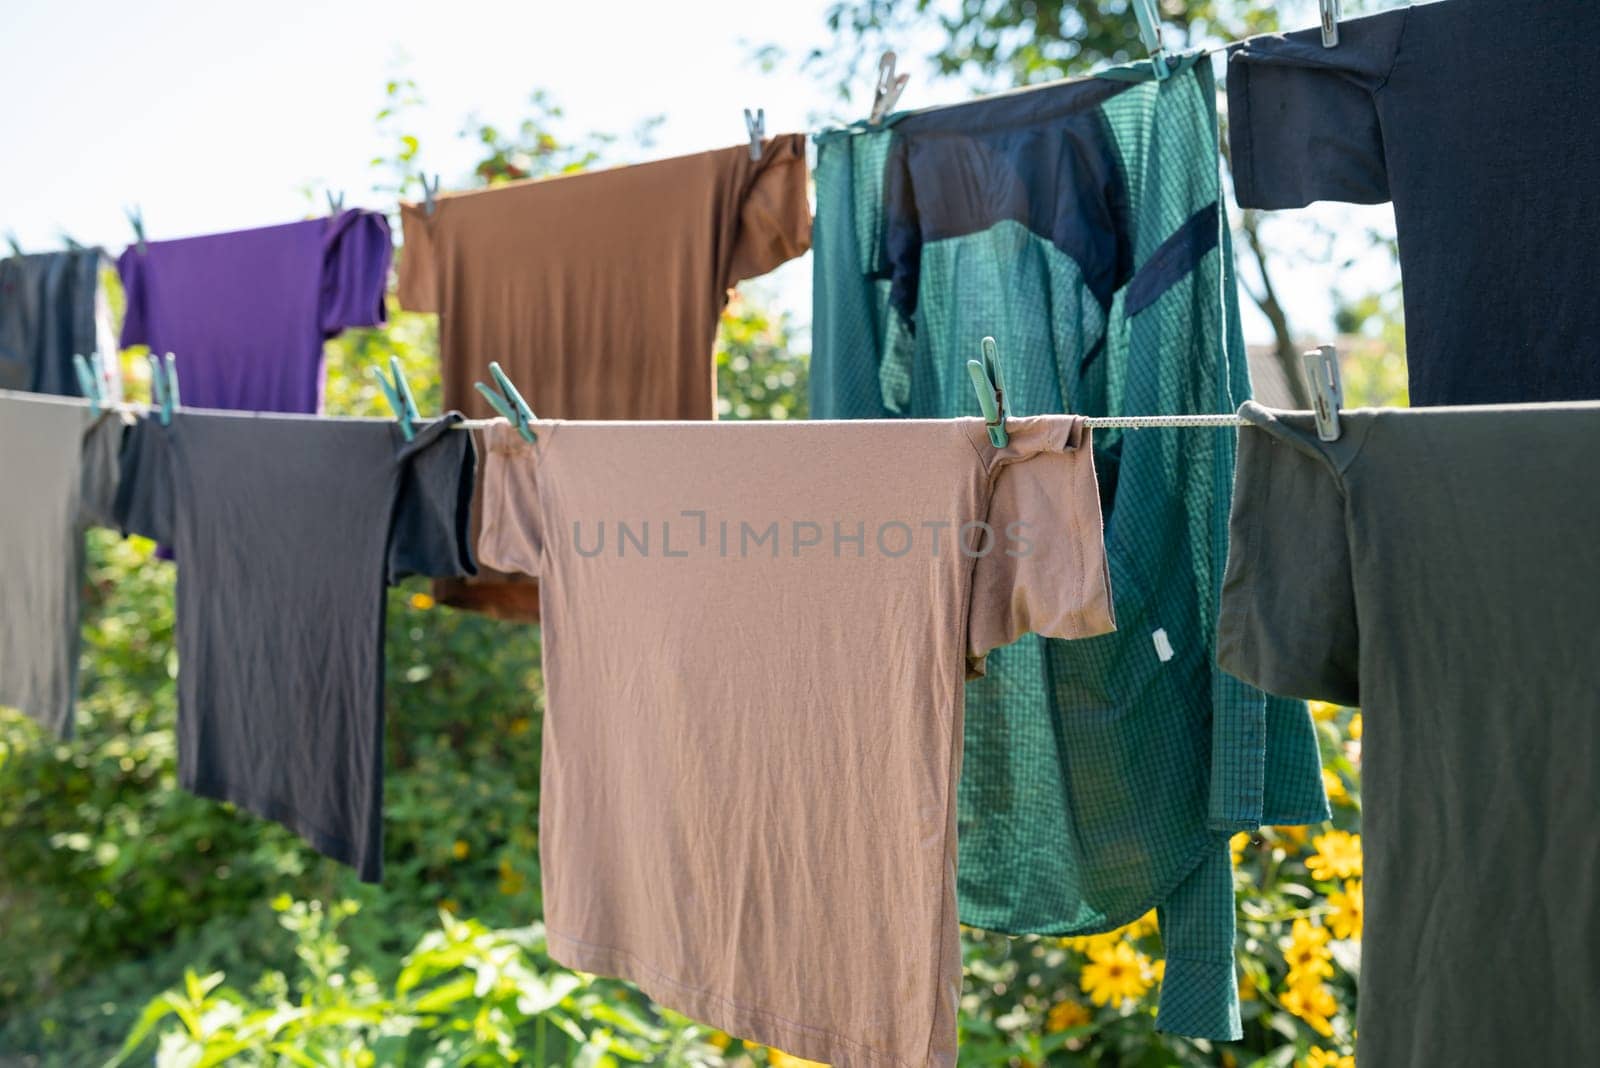 Male T-Shirts, doing laundry, washing clothes in the countryside